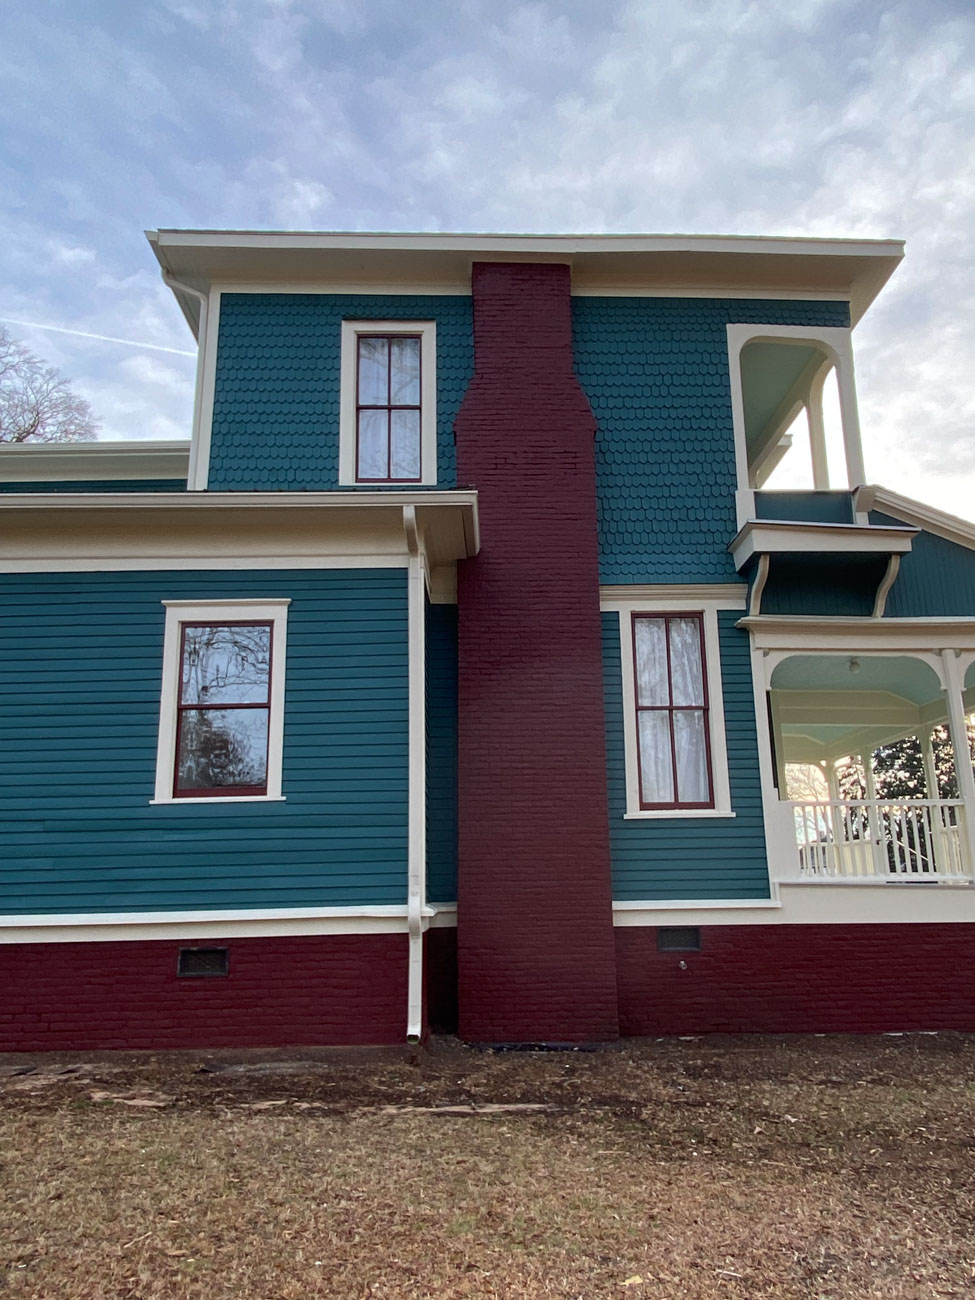 Gutters and Downspouts Match Trim Color on this Historic Home